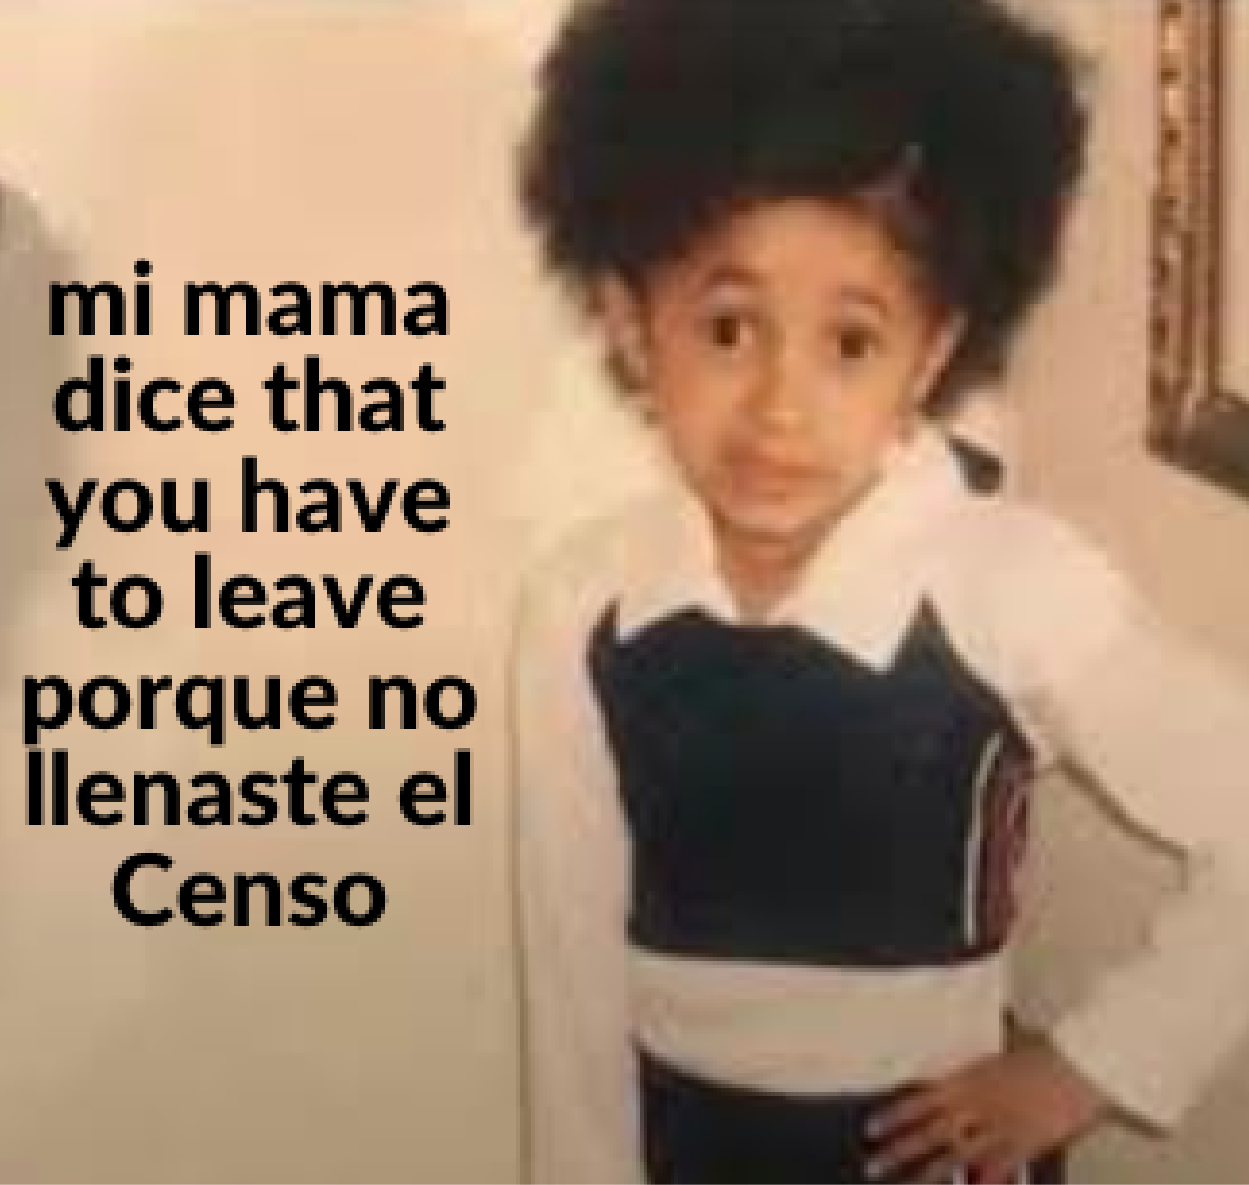 2020 Census meme with Cardi B as a kid